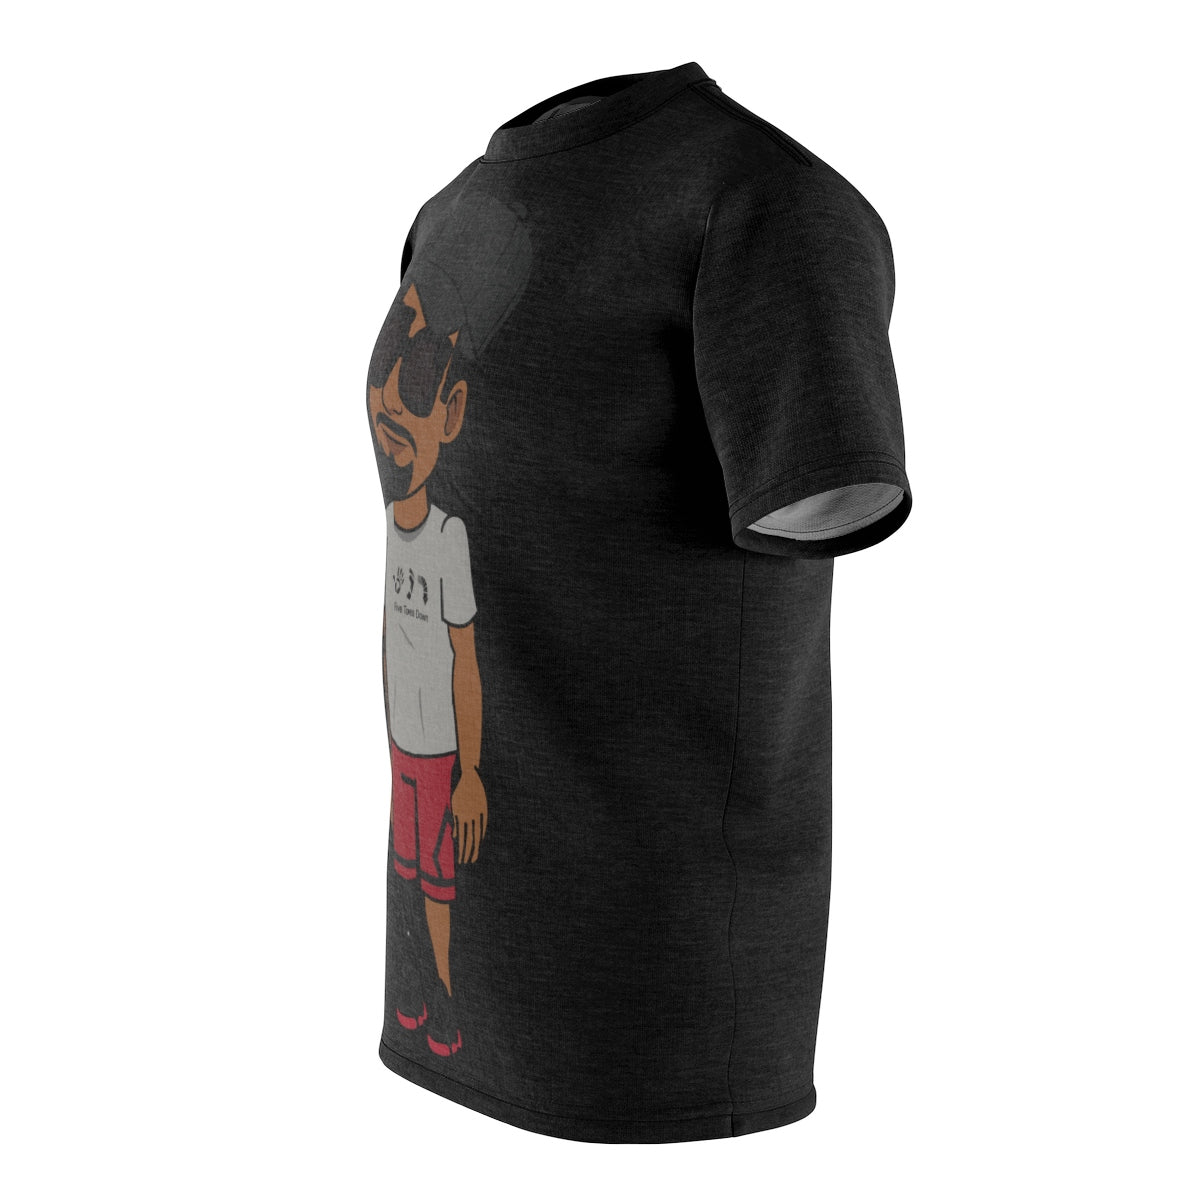 Five Toes Down Henry Unisex Cut & Sew Tee Blk